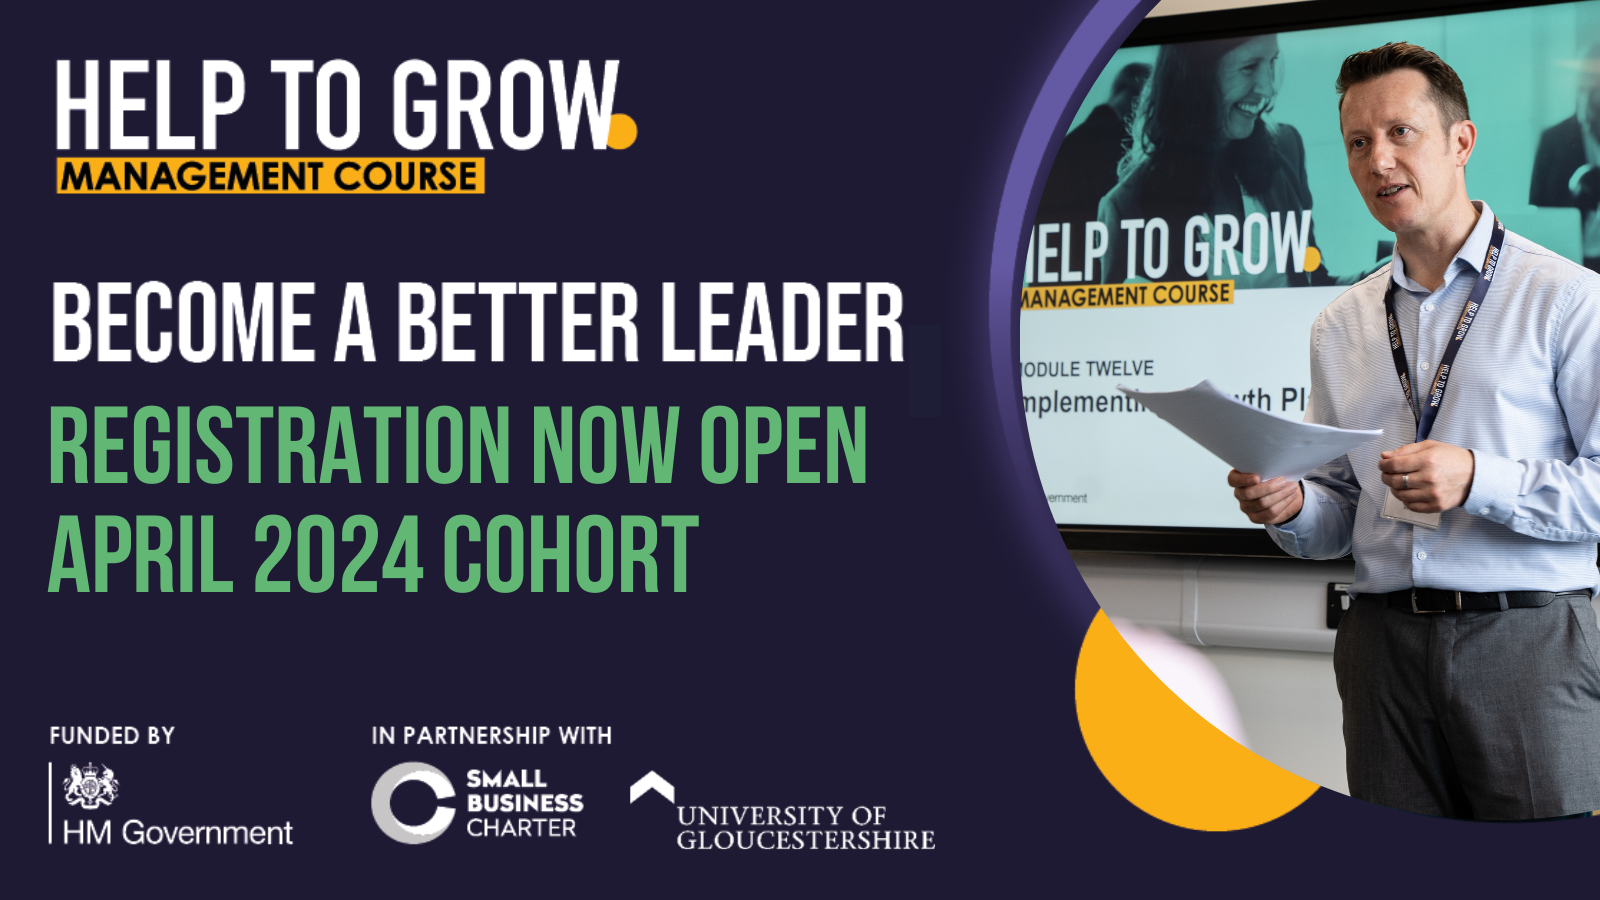 UNIVERSITY OF GLOUCESTERSHIRE LAUNCHES NEXT COHORT OF SELL-OUT ‘HELP TO GROW: MANAGEMENT PROGRAMME’